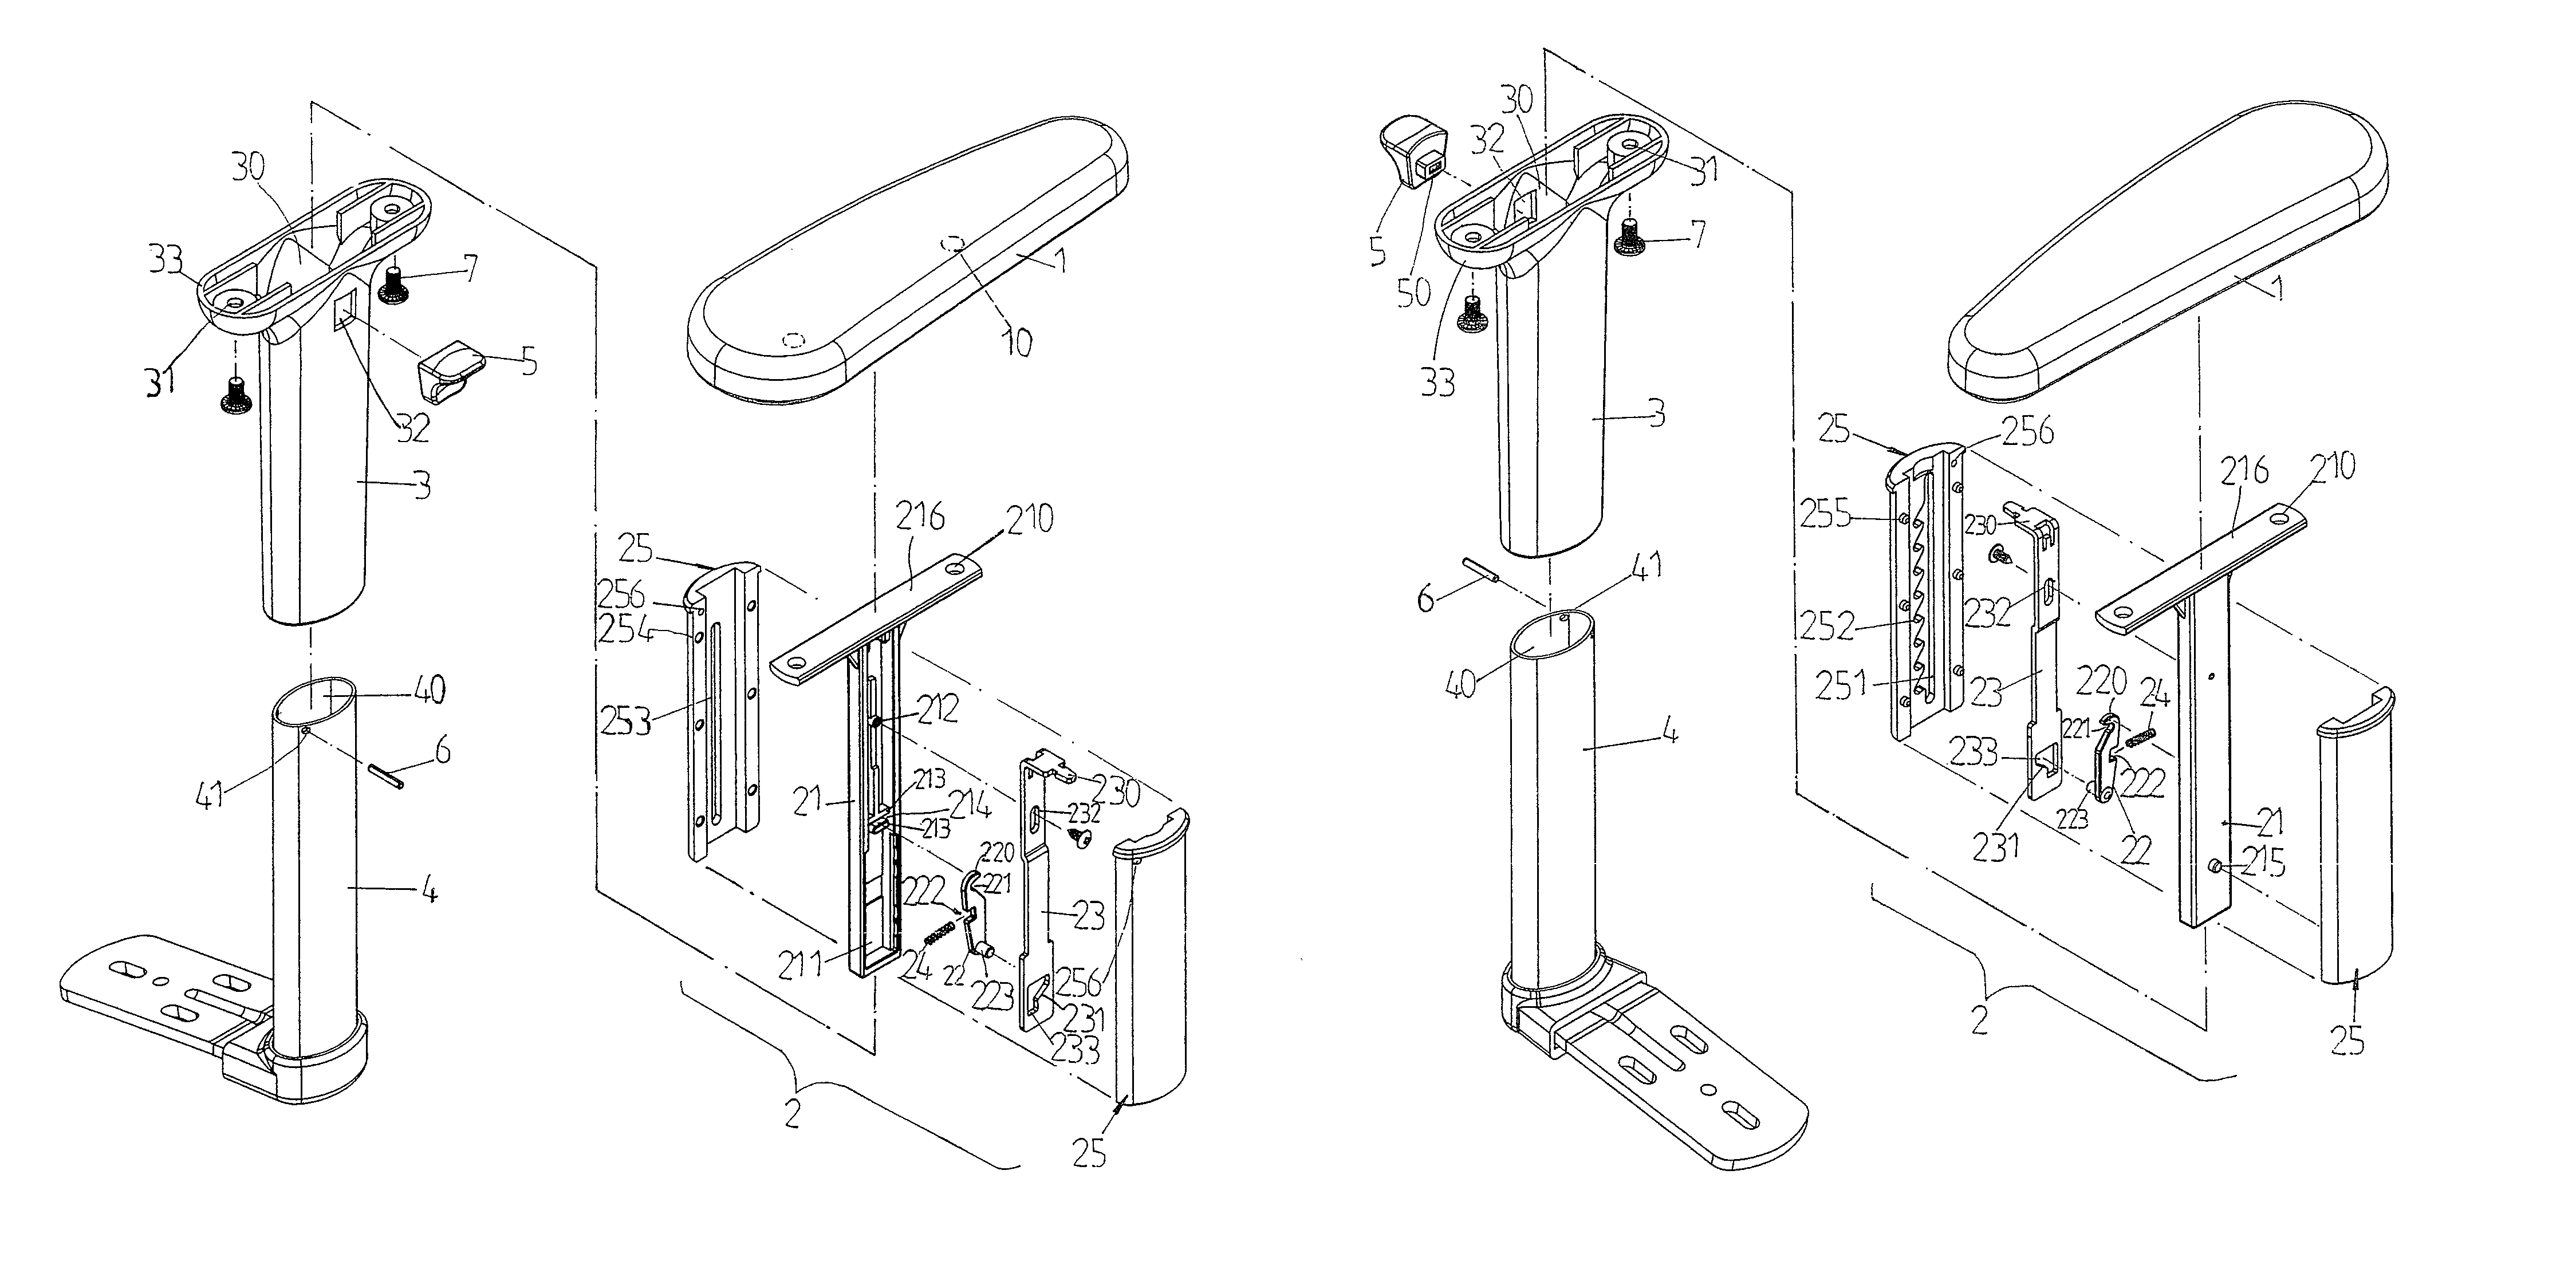 Chair armrest assembly having adjustable height